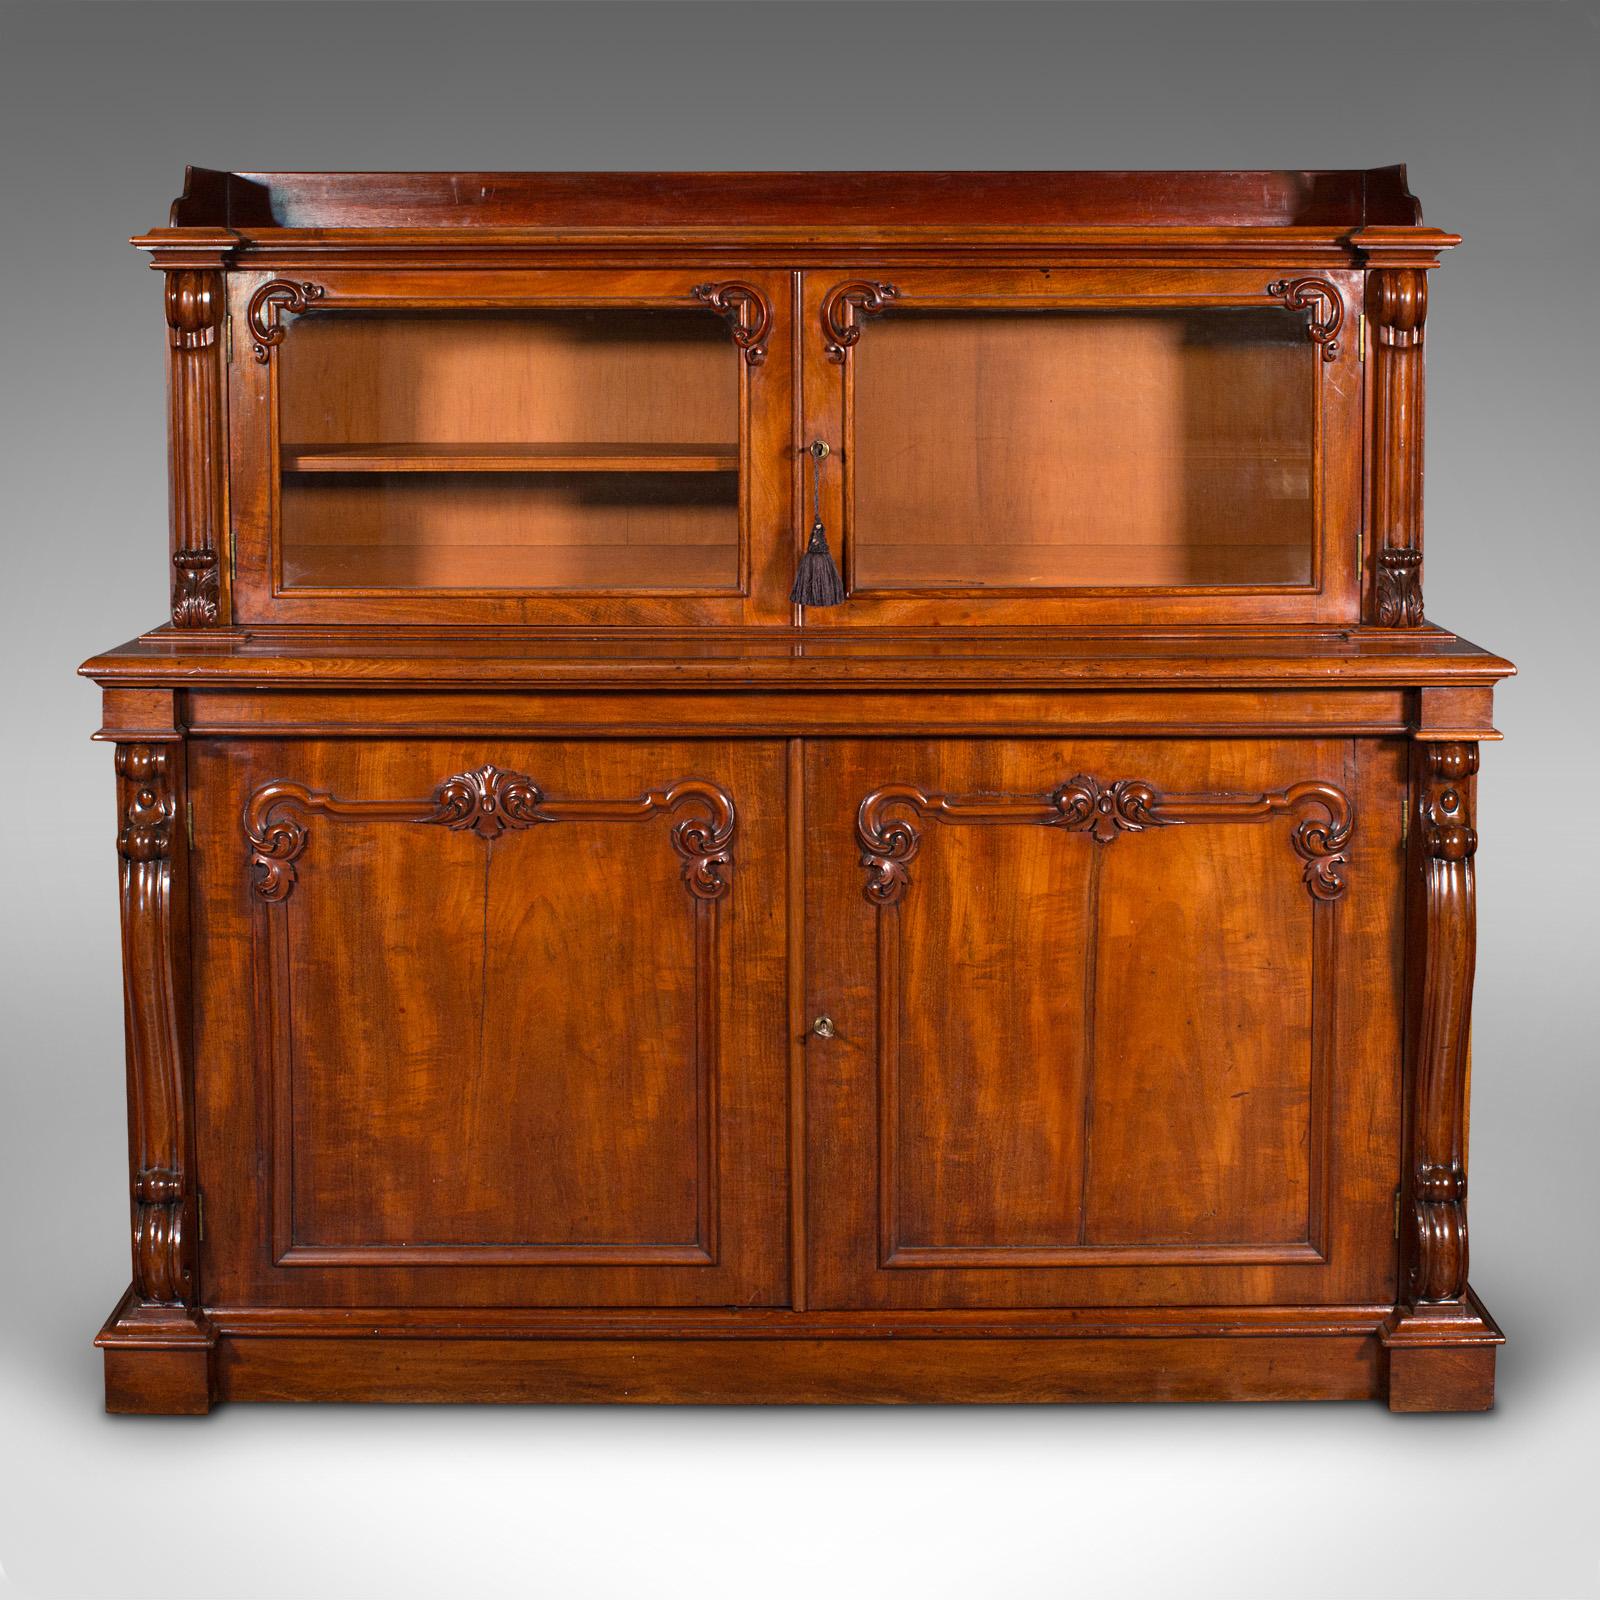 This is a large antique morning room cabinet. An English, mahogany and glass country house side cupboard, dating to the early Victorian period, circa 1840.

Fine craftsmanship and unusual in this proportion and style
Displays a desirable aged patina